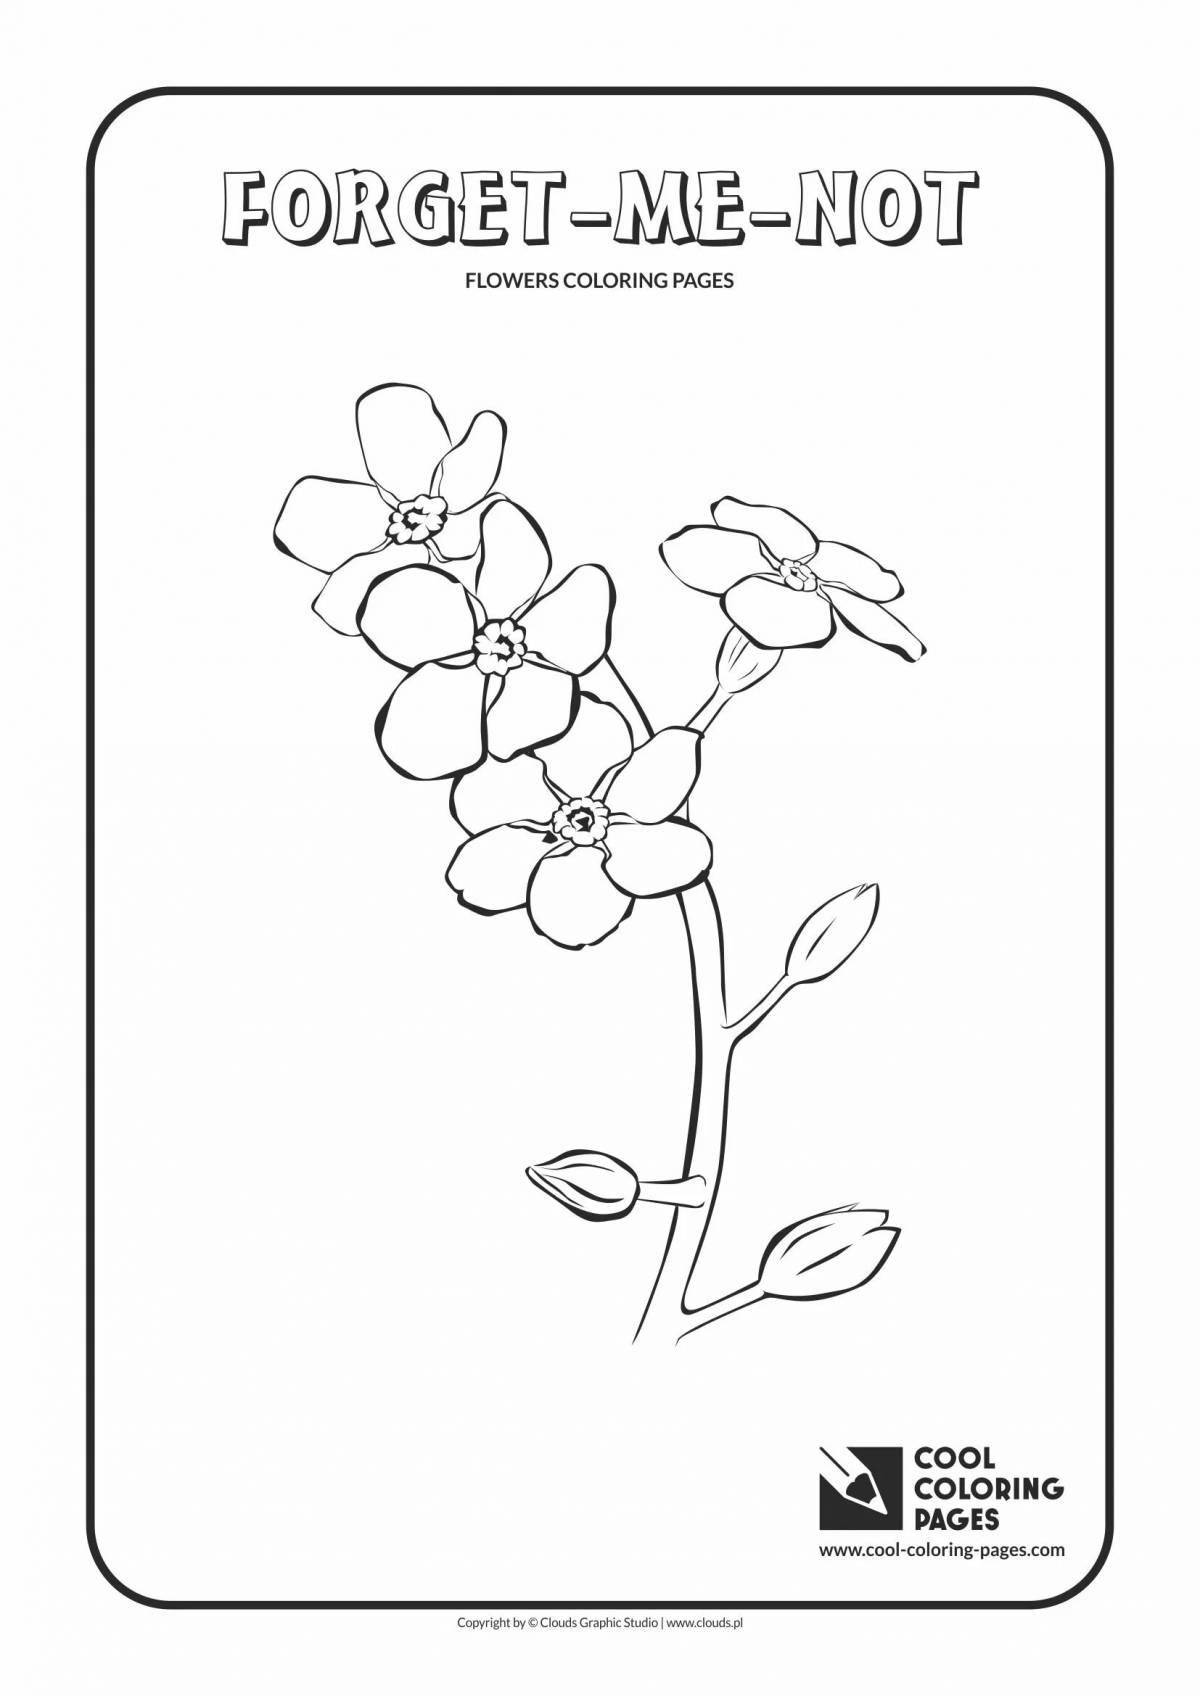 Coloring page blissful forget-me-not flower